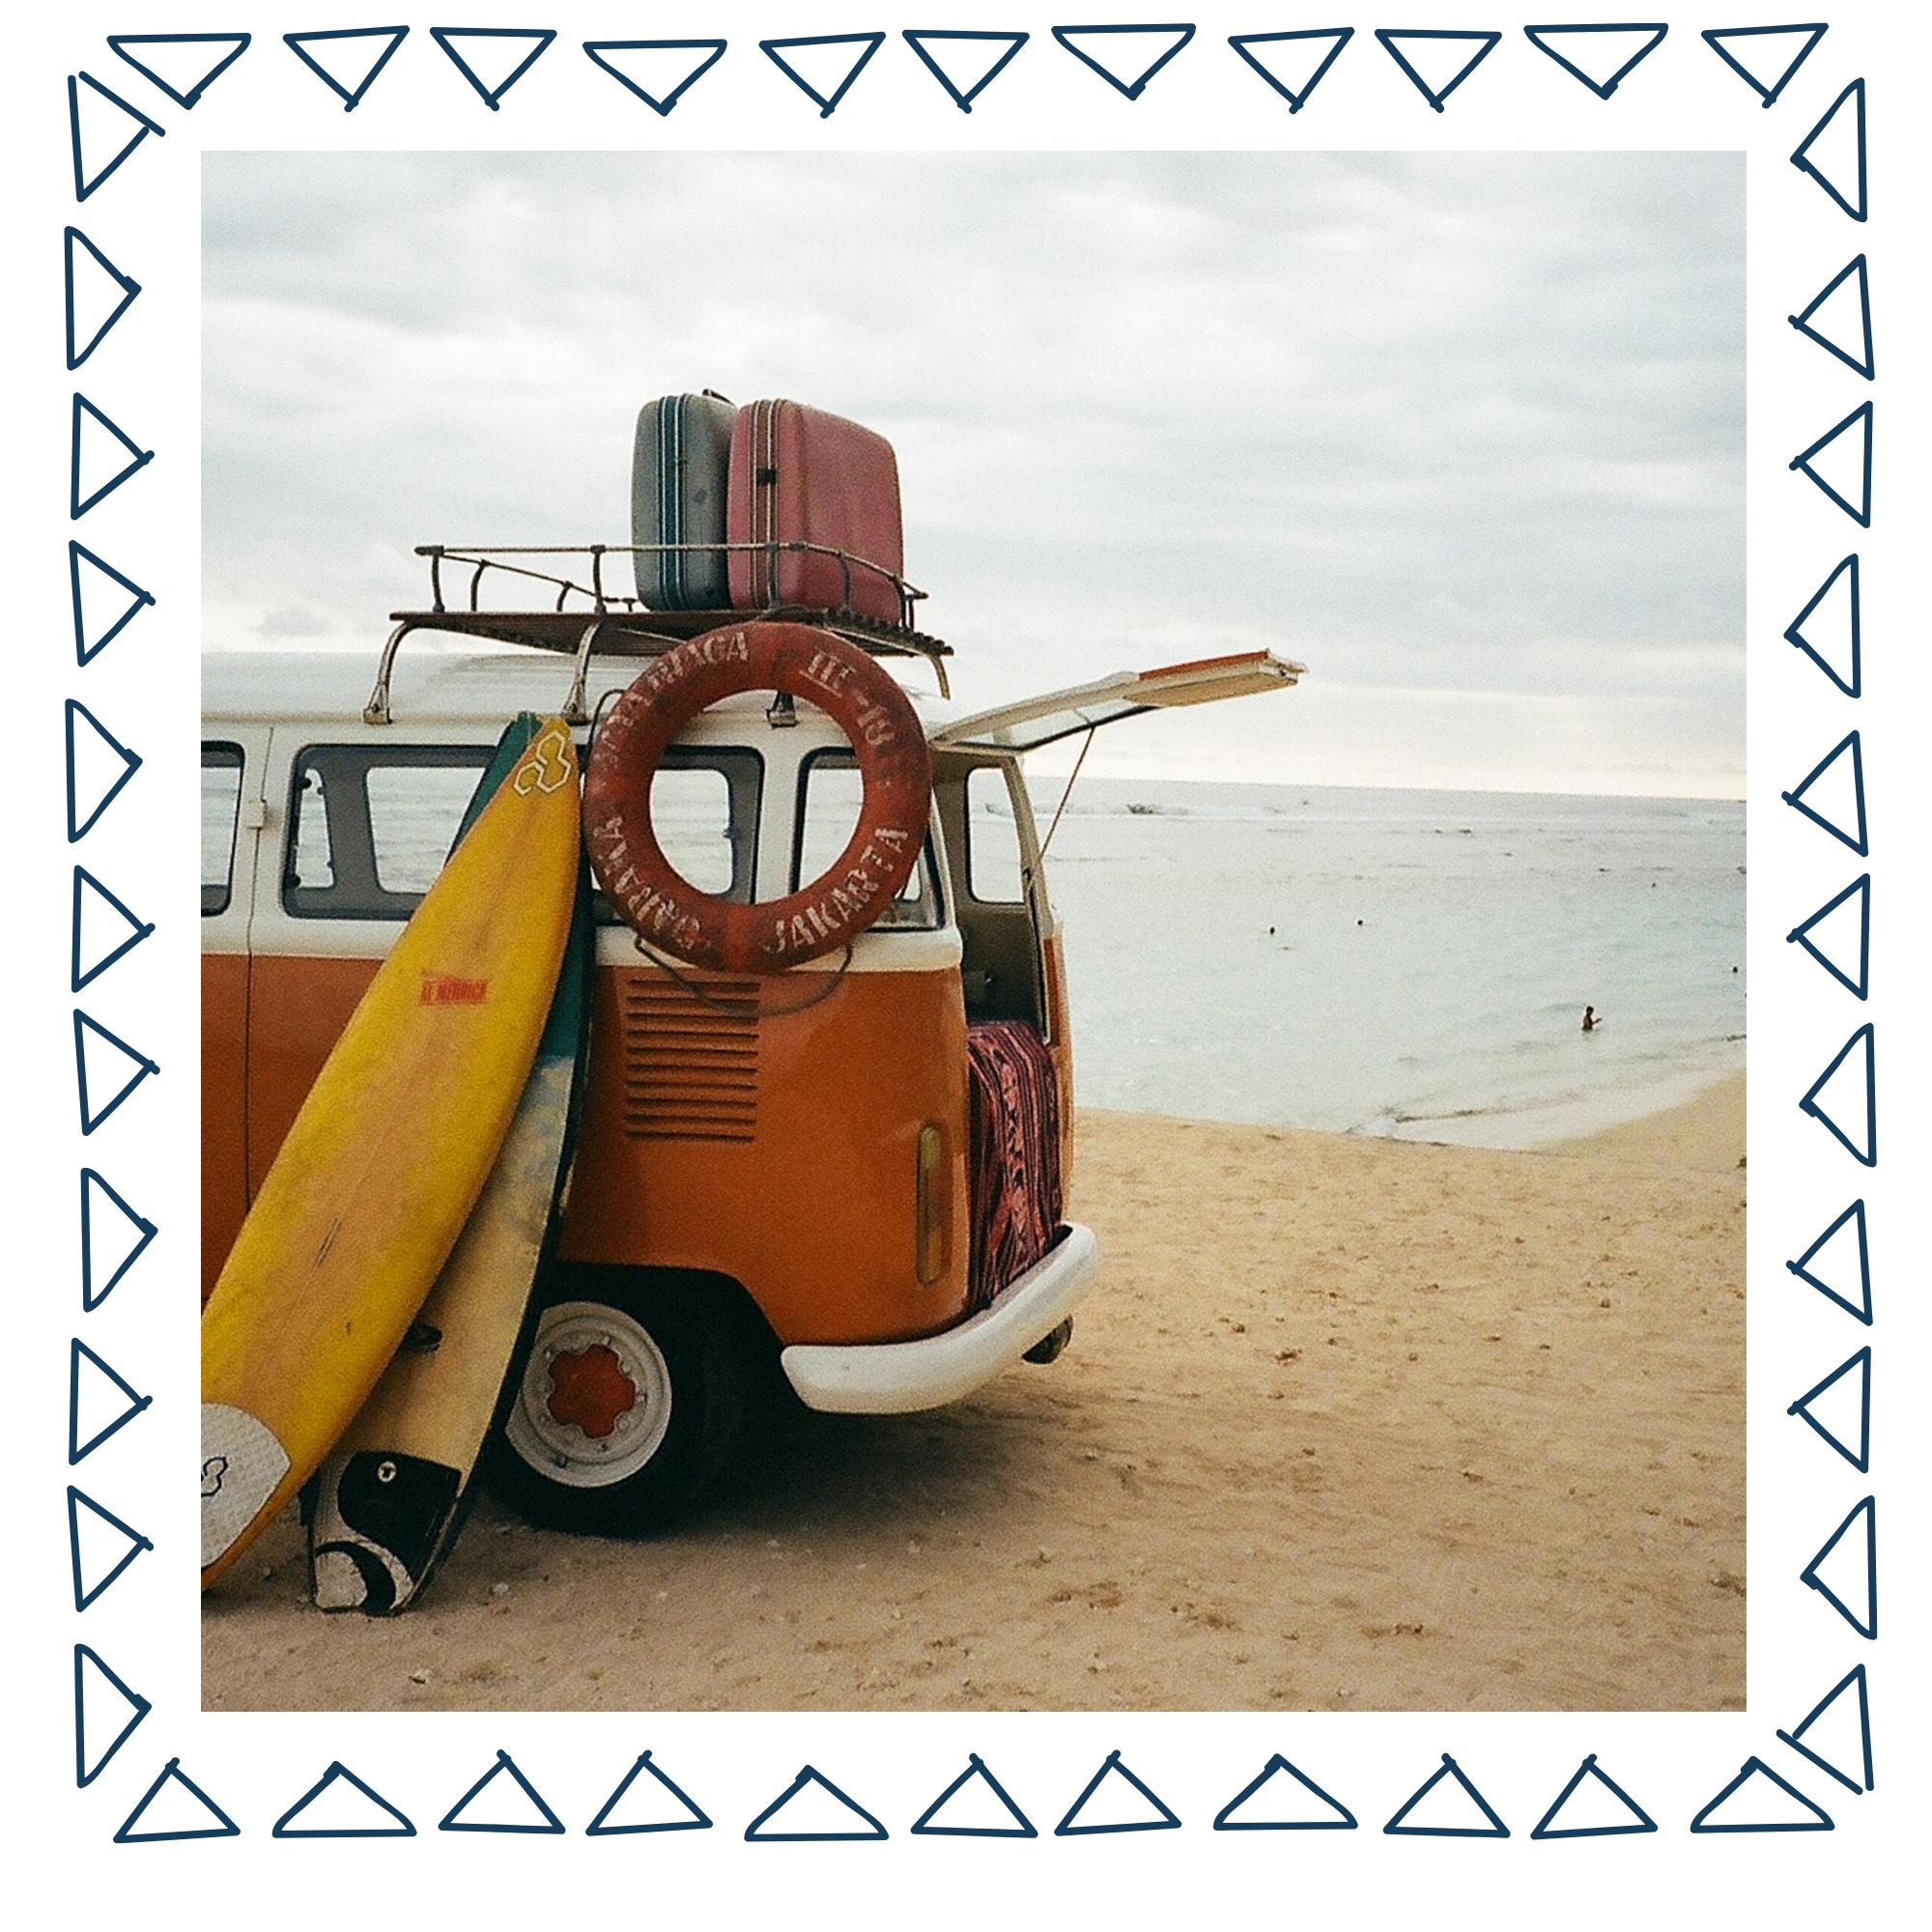 a 60s style VW Bus with surfboards and luggage on the top parked at the beach